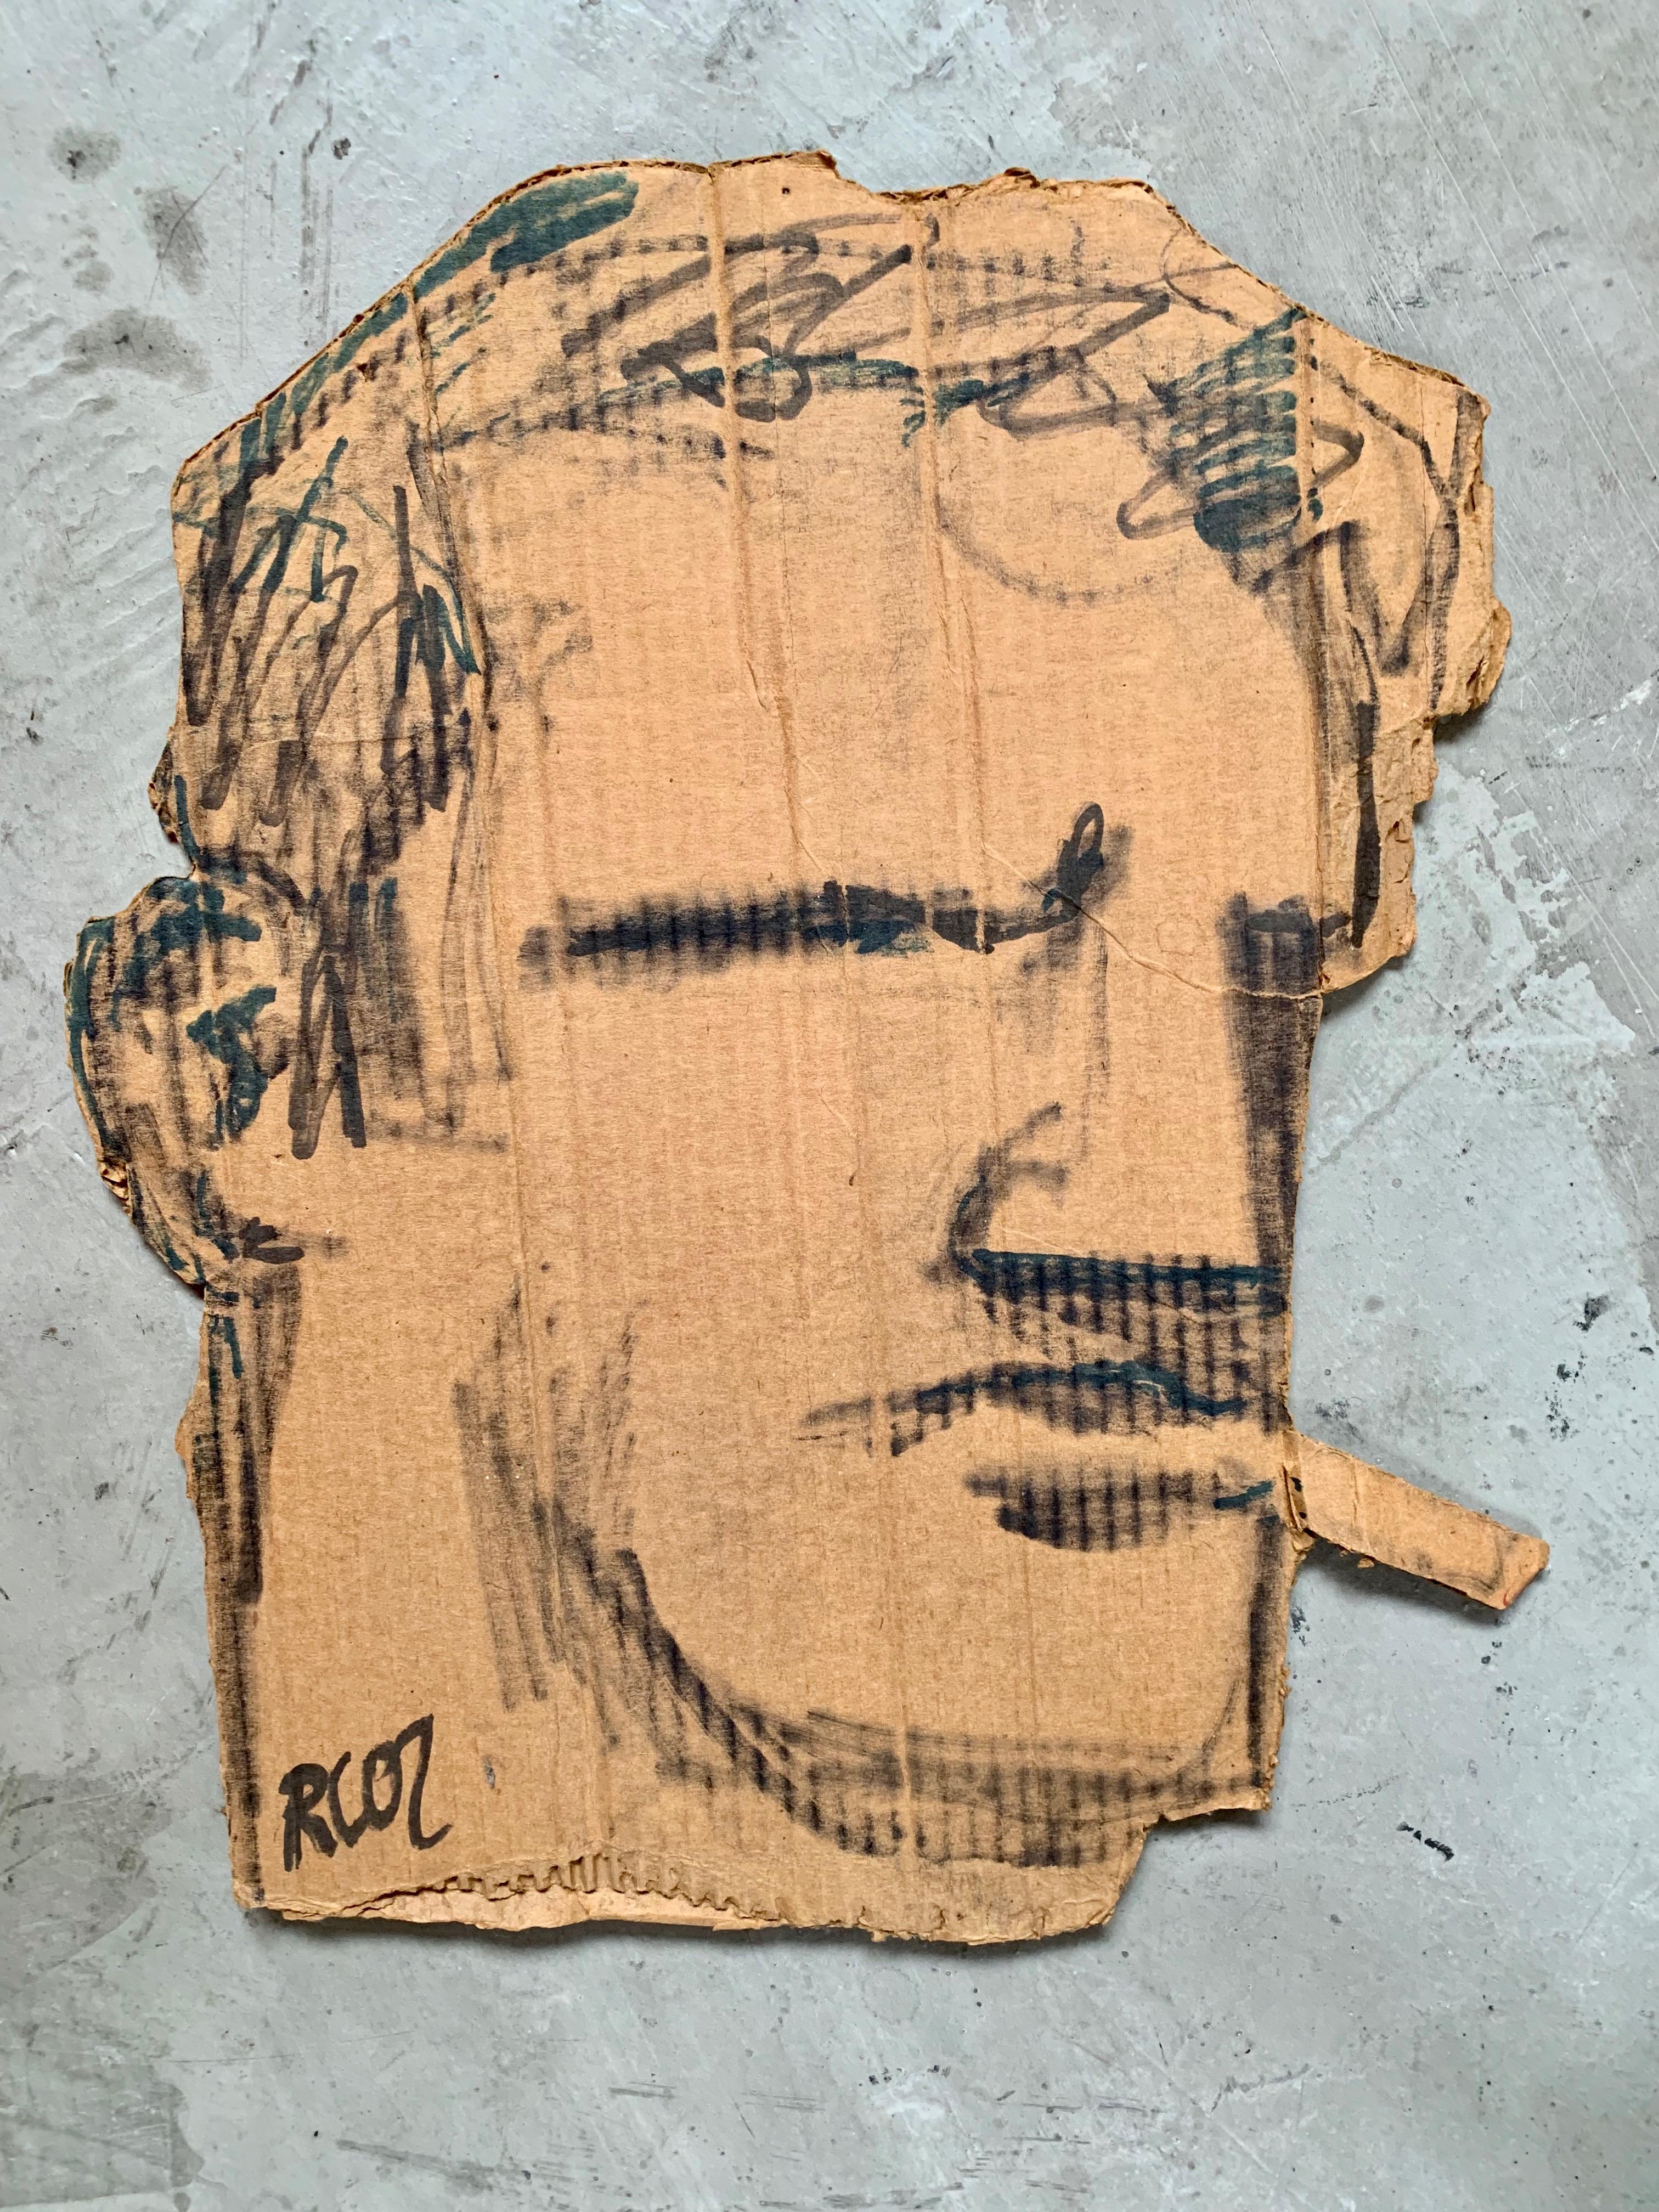 Large original drawing by Robert Loughlin on cardboard. Very unique drawing with the Brute cut out. Signed RL 02' on the front. Titled 'Sleater Kinny' on the back.

   